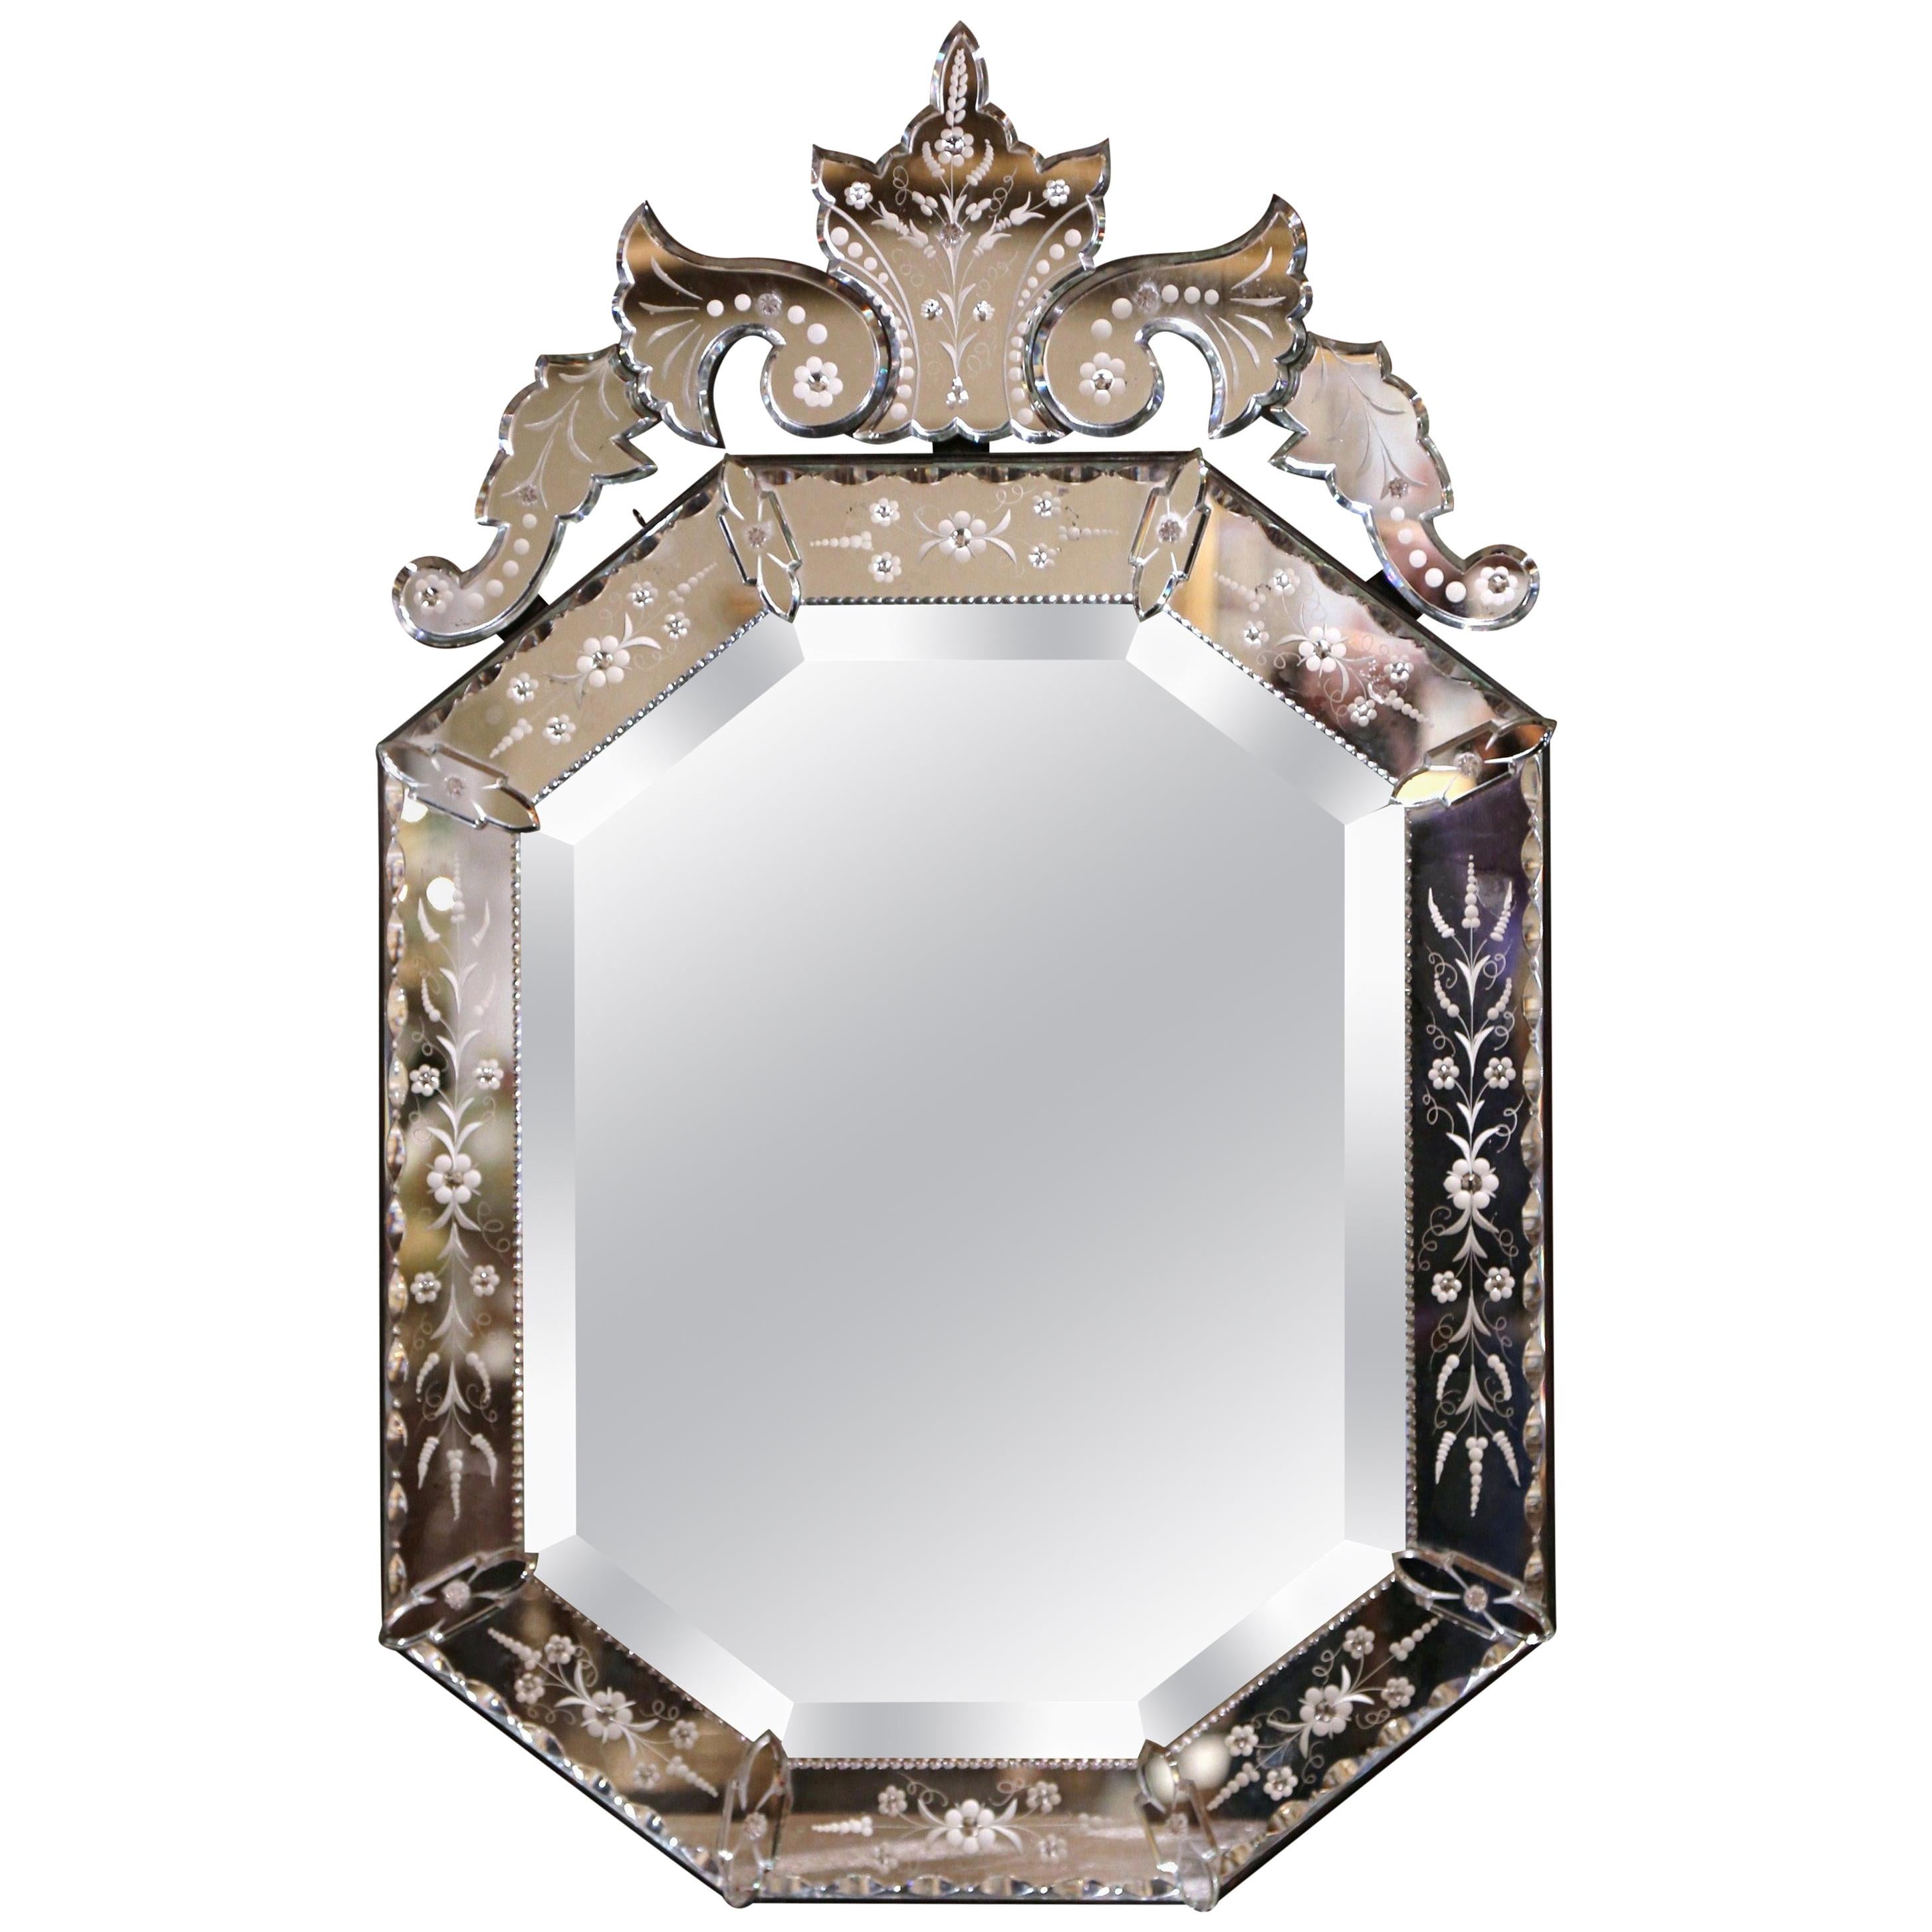 Early 20th Century Italian Octagonal Venetian Mirror with Painted Floral Etching